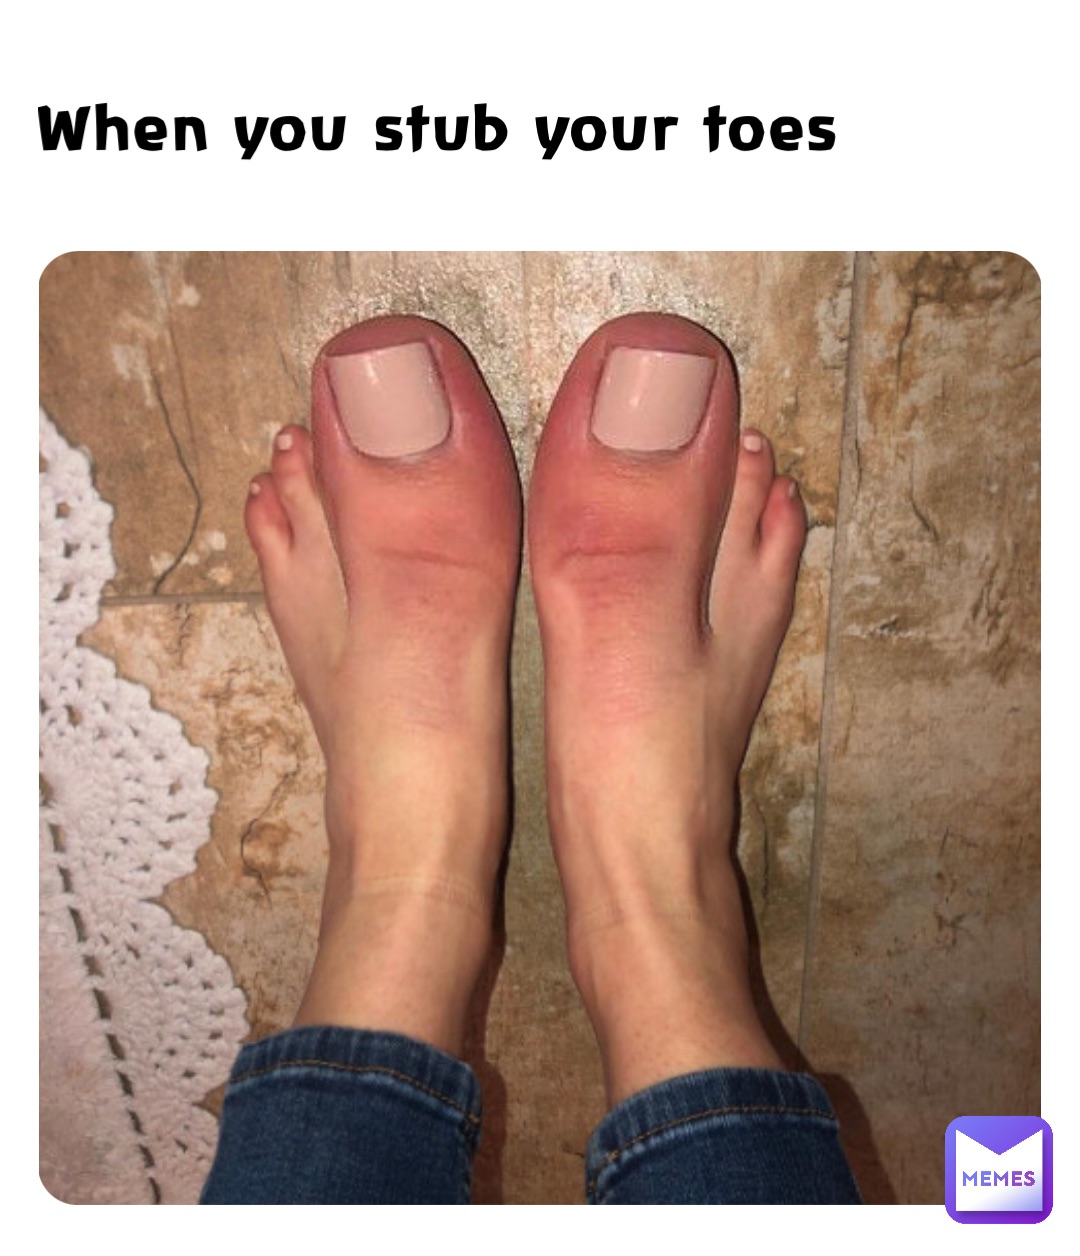 When you stub your toes